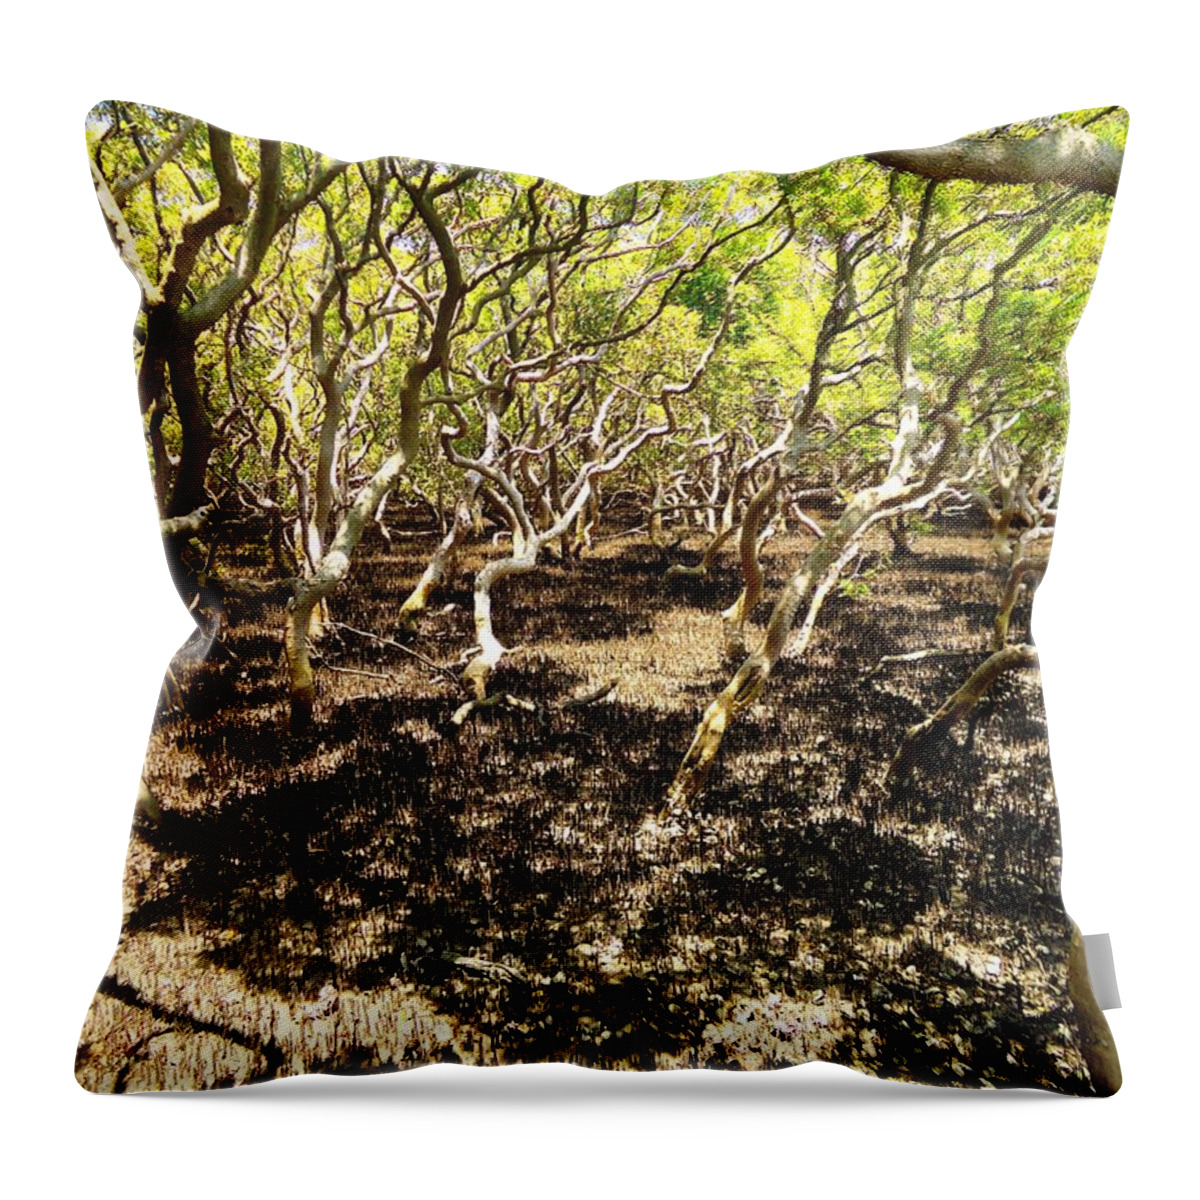 Mangrove Throw Pillow featuring the photograph Mangrove Swamp by Peter Mooyman